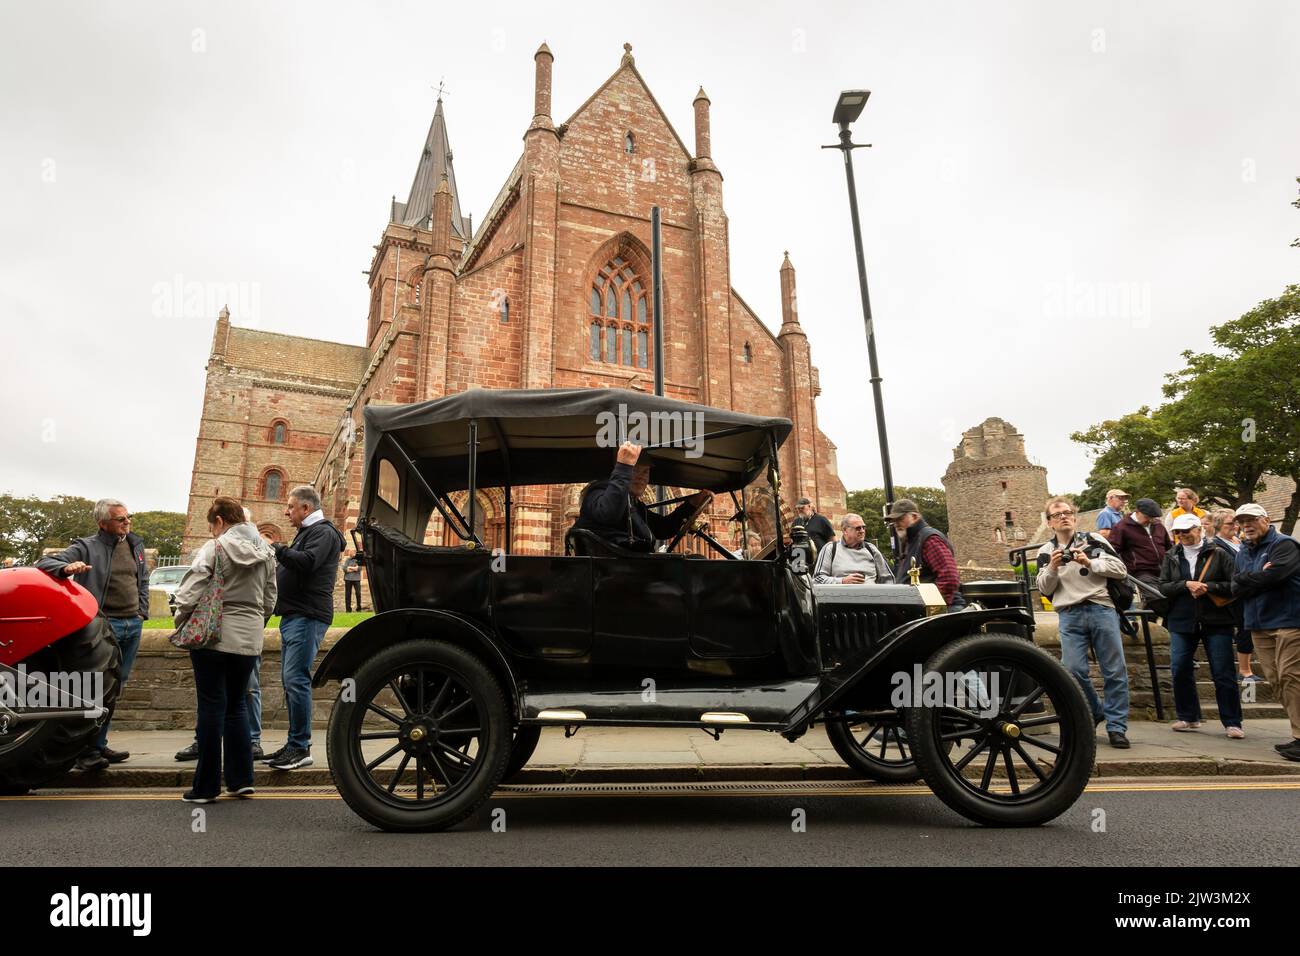 Kirkwall, Orkney, UK. Saturday, 3rd September, 2022. Angus Harcus, 78, with his 1915 Ford Model T car in front of St Magnus Cathedral at the Kirkwall Vintage Car Rally, Kirkwall, Orkney, UK. Mr Harcus's car was imported from Canada in 2006 and is mostly original - just a few minor renovations. The Vintage Car Rally is part of the International Orkney Science Festival. Credit: Peter Lopeman/Alamy Live News Stock Photo